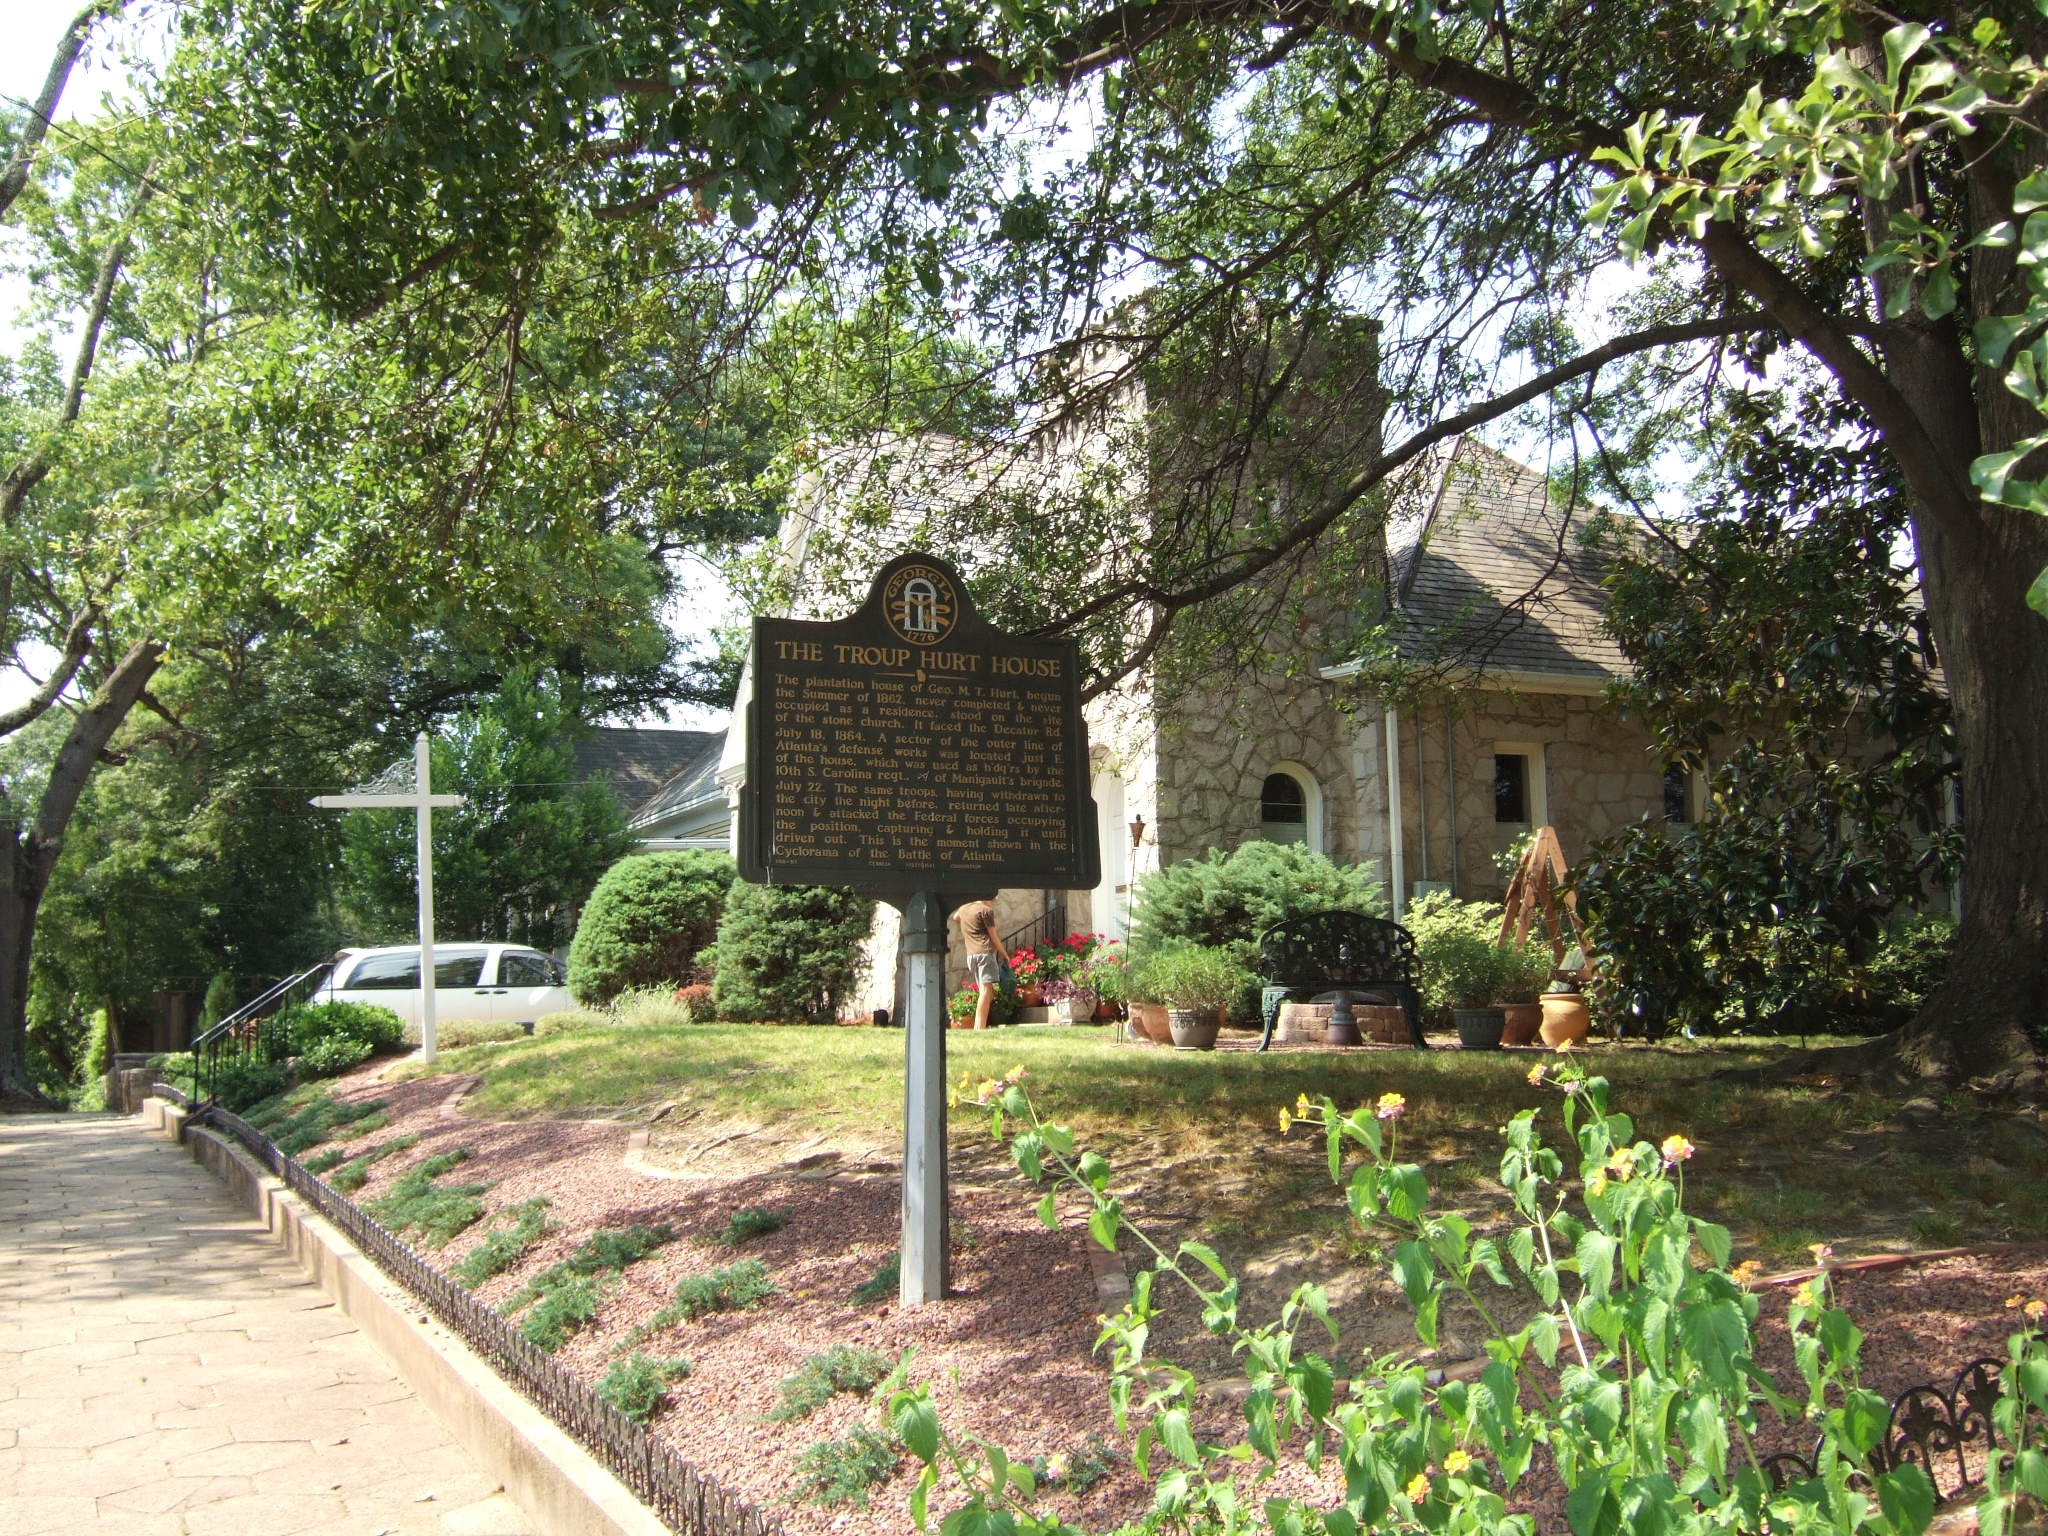 The Troup Hurt House Marker